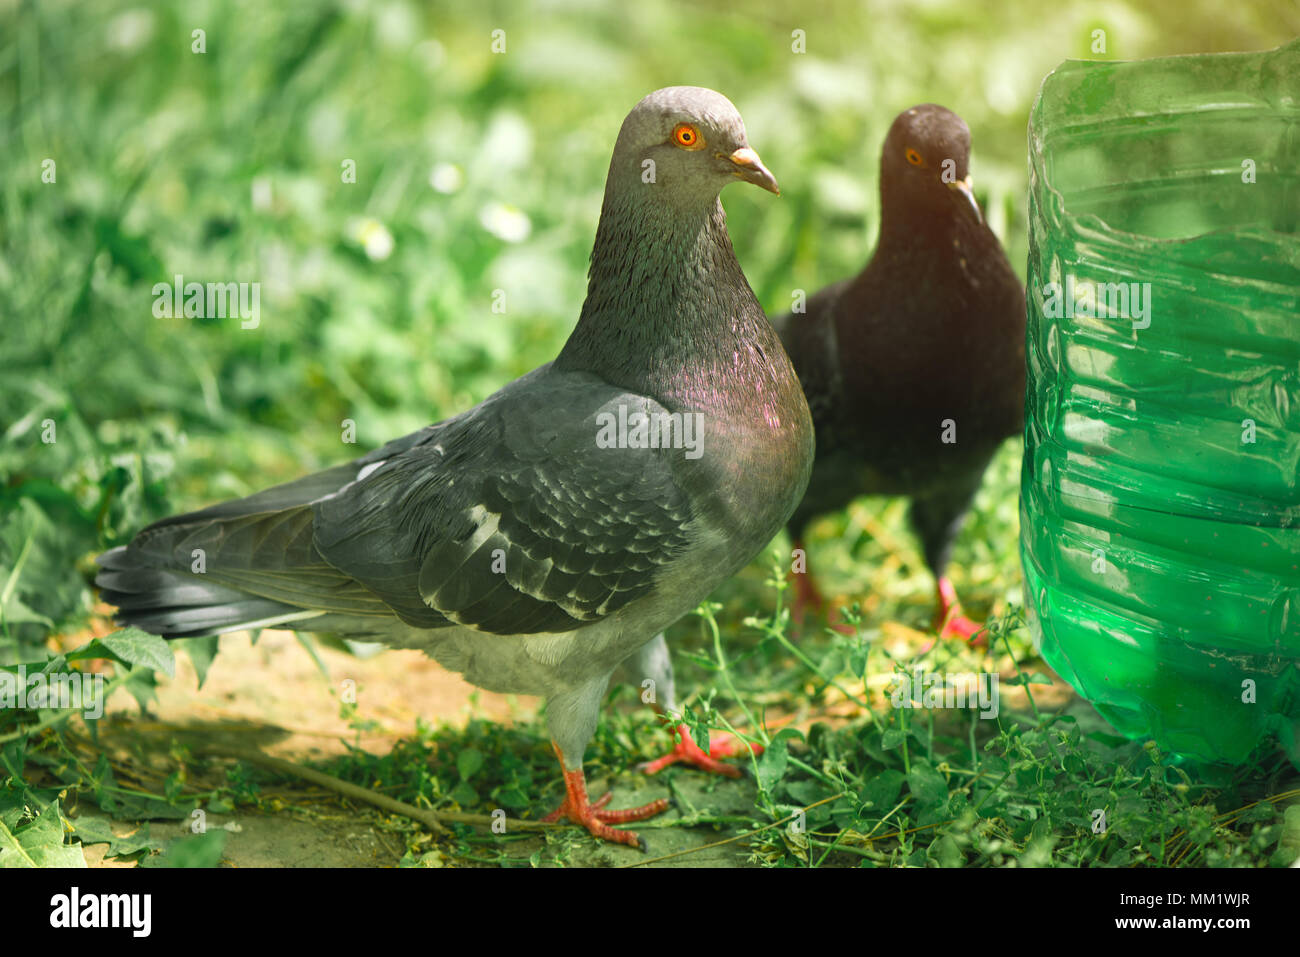 Pair of pigeons standing on the ground Stock Photo